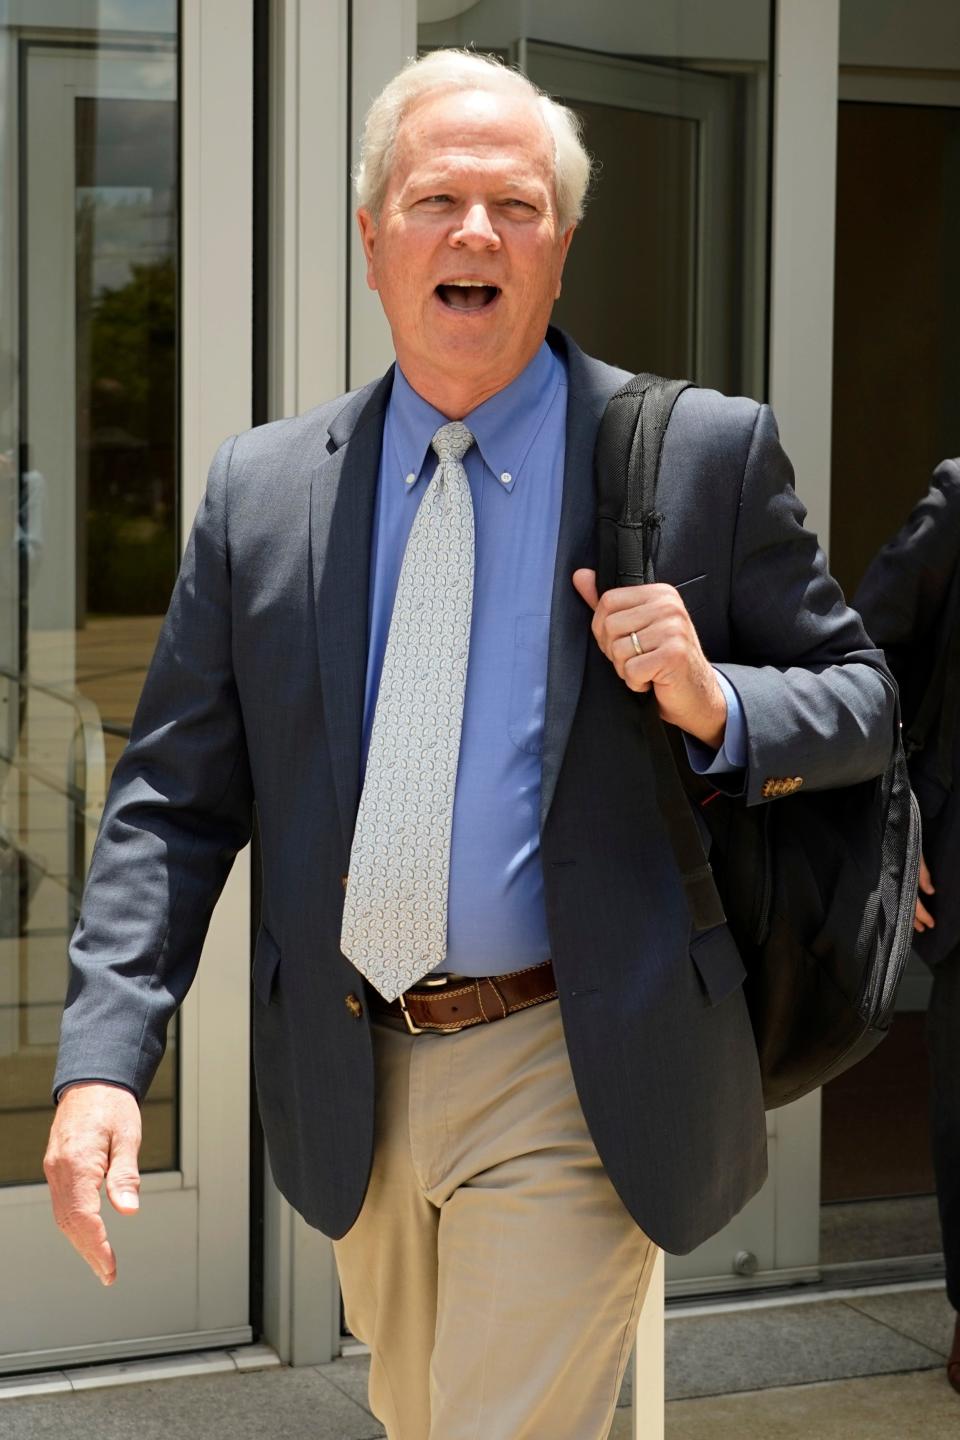 Ted Henifin, the interim third-party manager appointed by the U.S. Department of Justice to help fix the long-troubled water system of the Mississippi's capital city, tells reporters that he had "no comment" while exiting the Thad Cochran United States Courthouse in Jackson on Wednesday, following a status hearing called by United States District Court Judge Henry Wingate regarding recent comments Mayor Chokwe Antar Lumumba made about the city's water system.